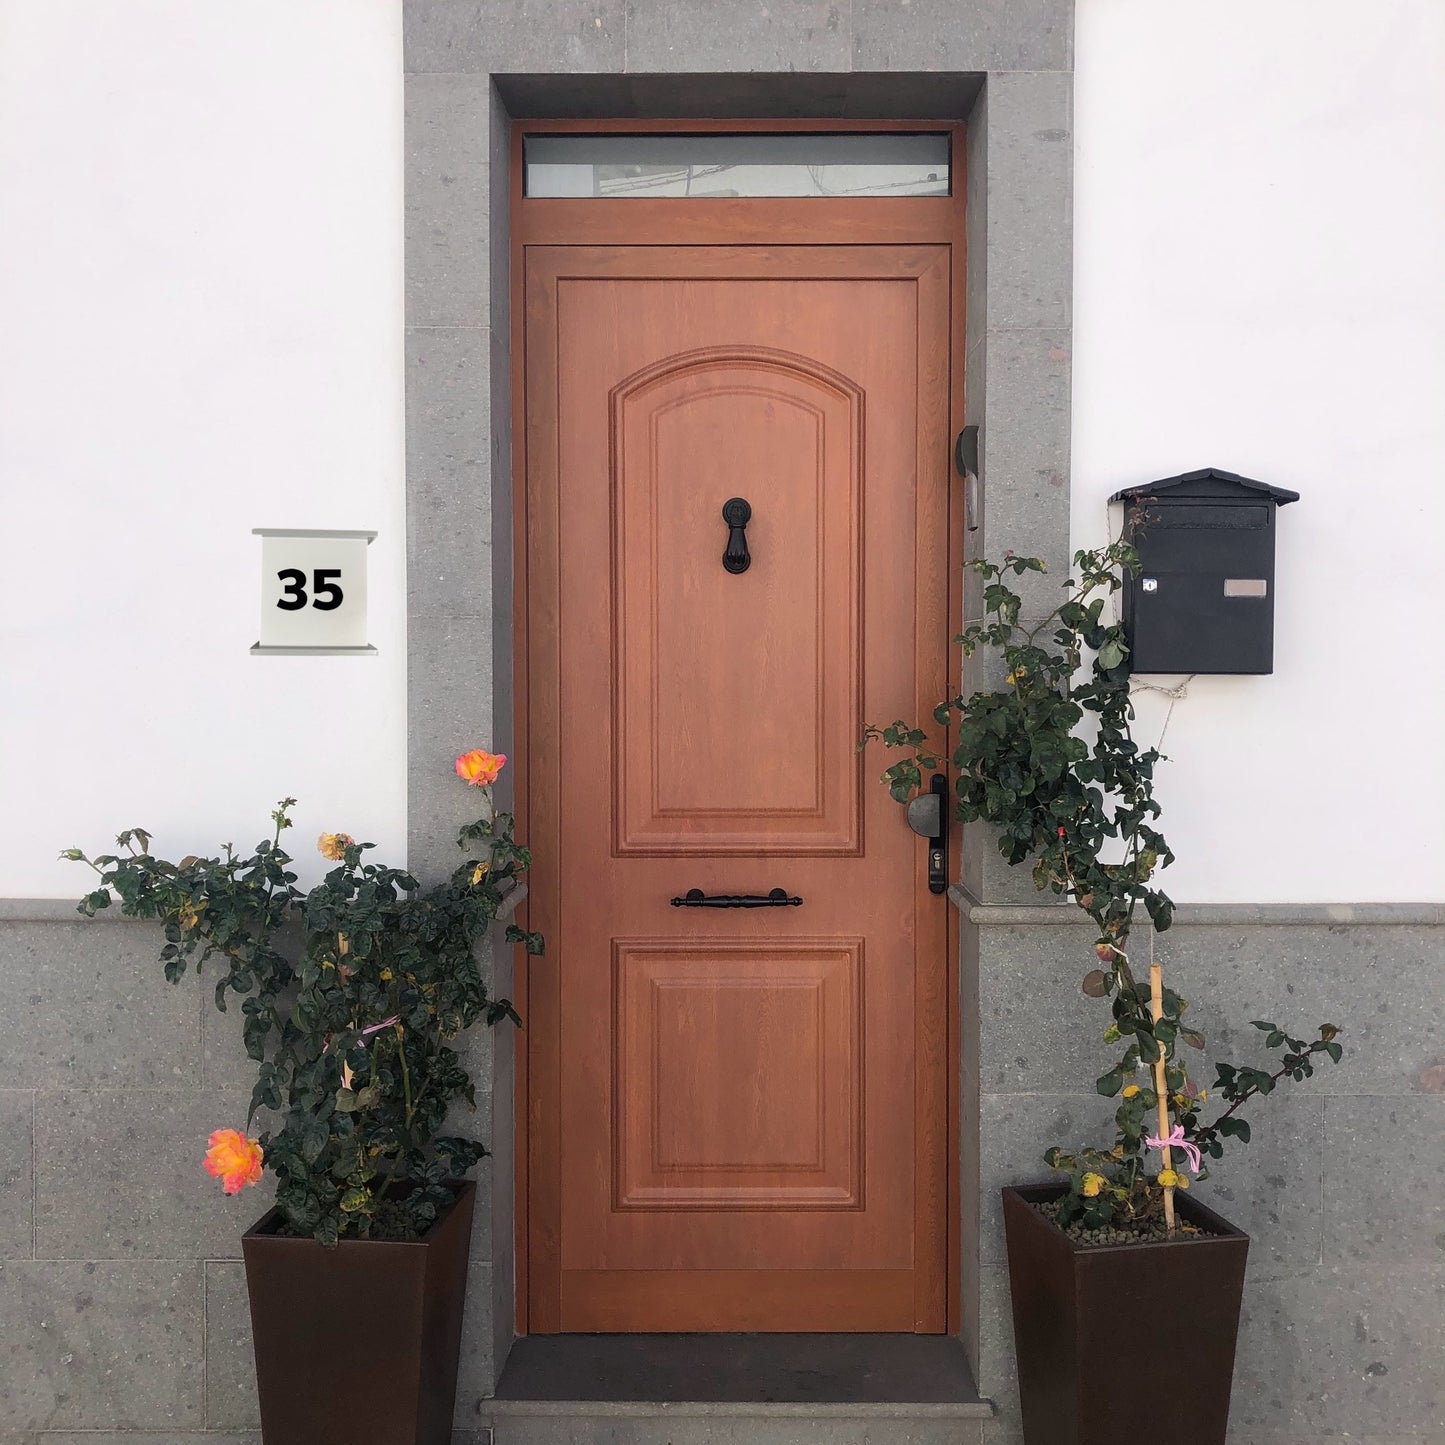 House number lights are mainly used to help guests, postal and parcel services, but also rescue services to find the right address. This stylish house number adds a real element of class and style to your front of house.